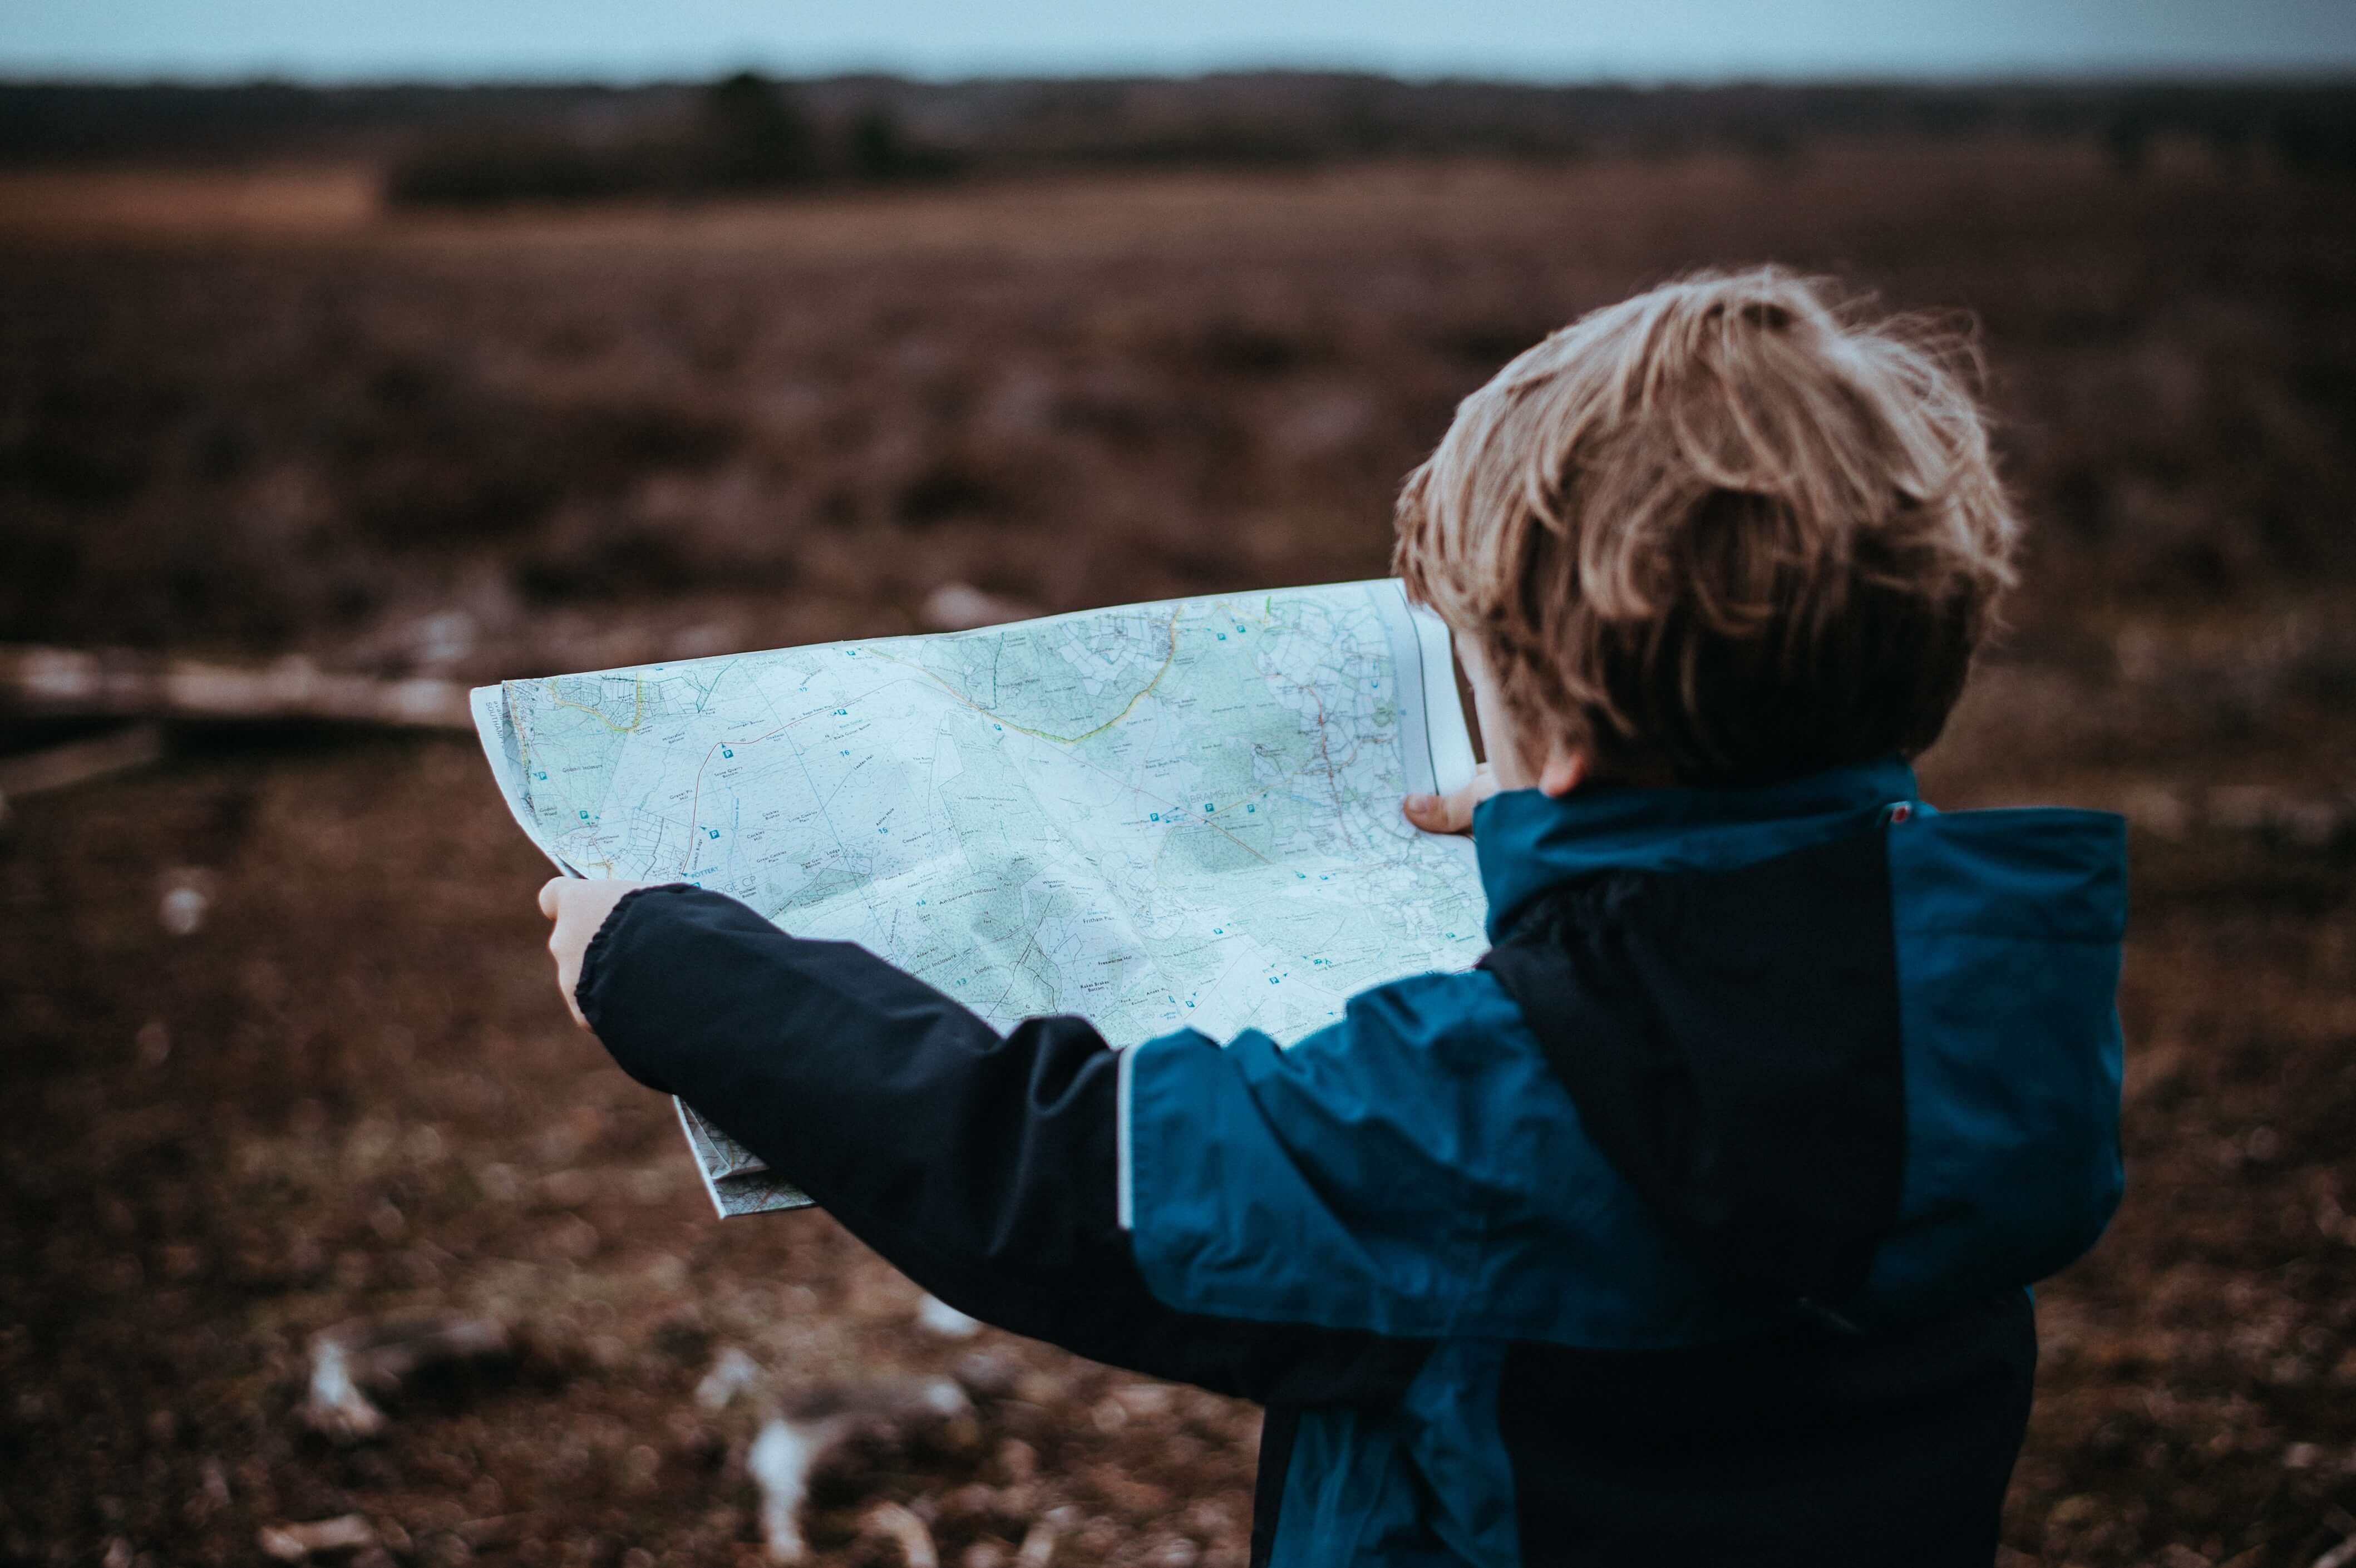 A child outside, holding a map in front of him with his back to the camera.